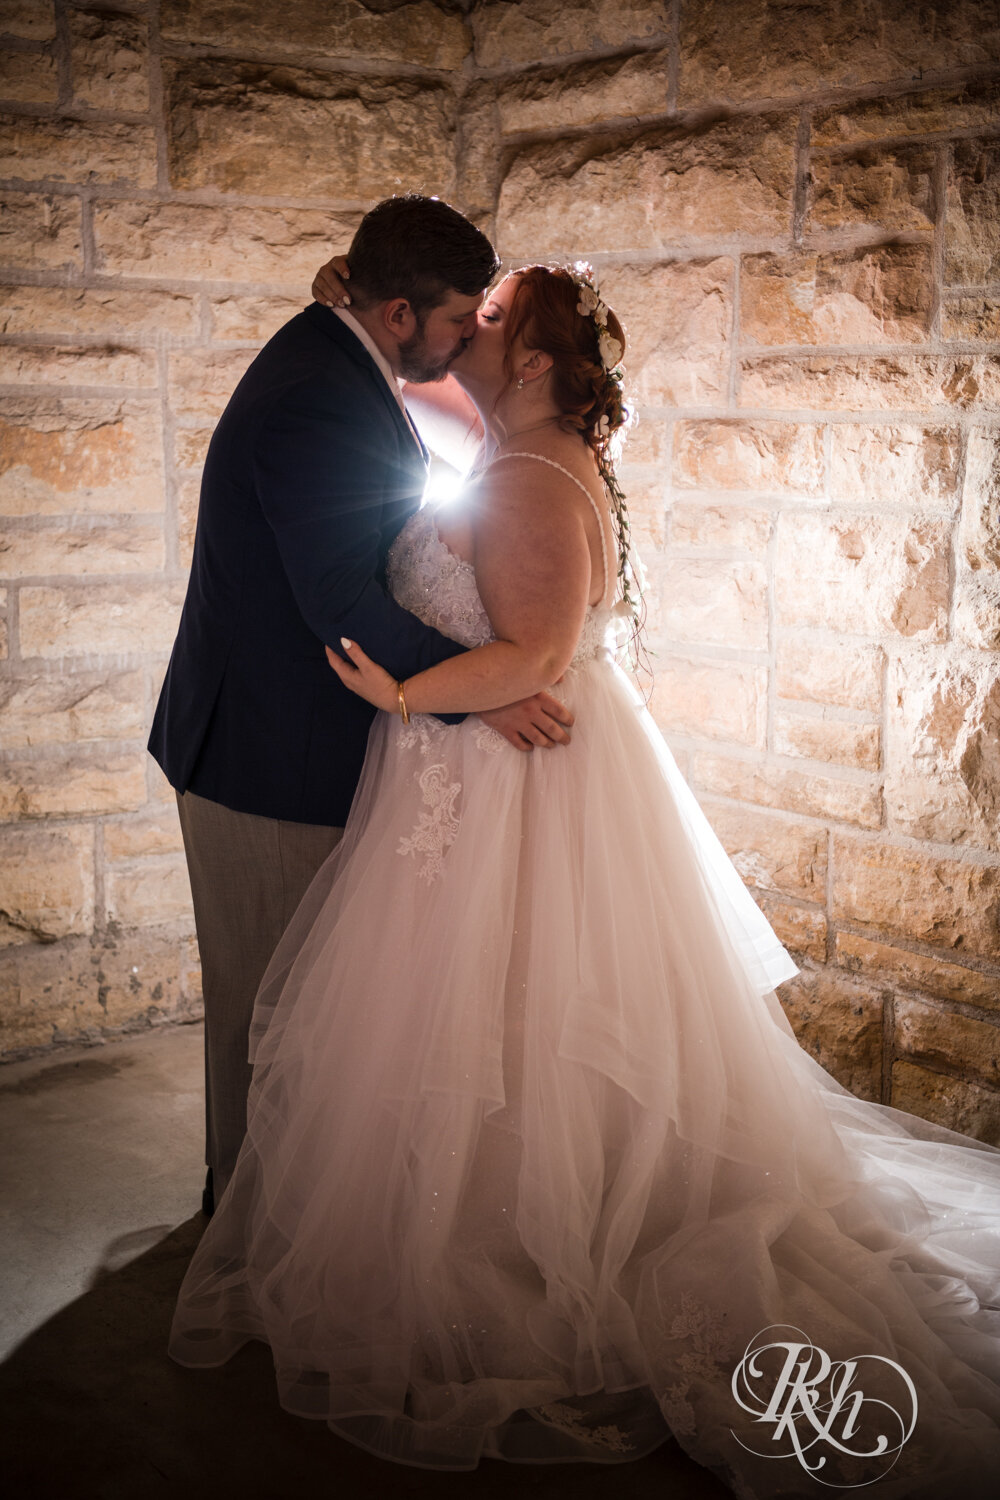 Plus size bride and groom kiss at wedding at Olmsted County Fairgrounds in Rochester, Minnesota.